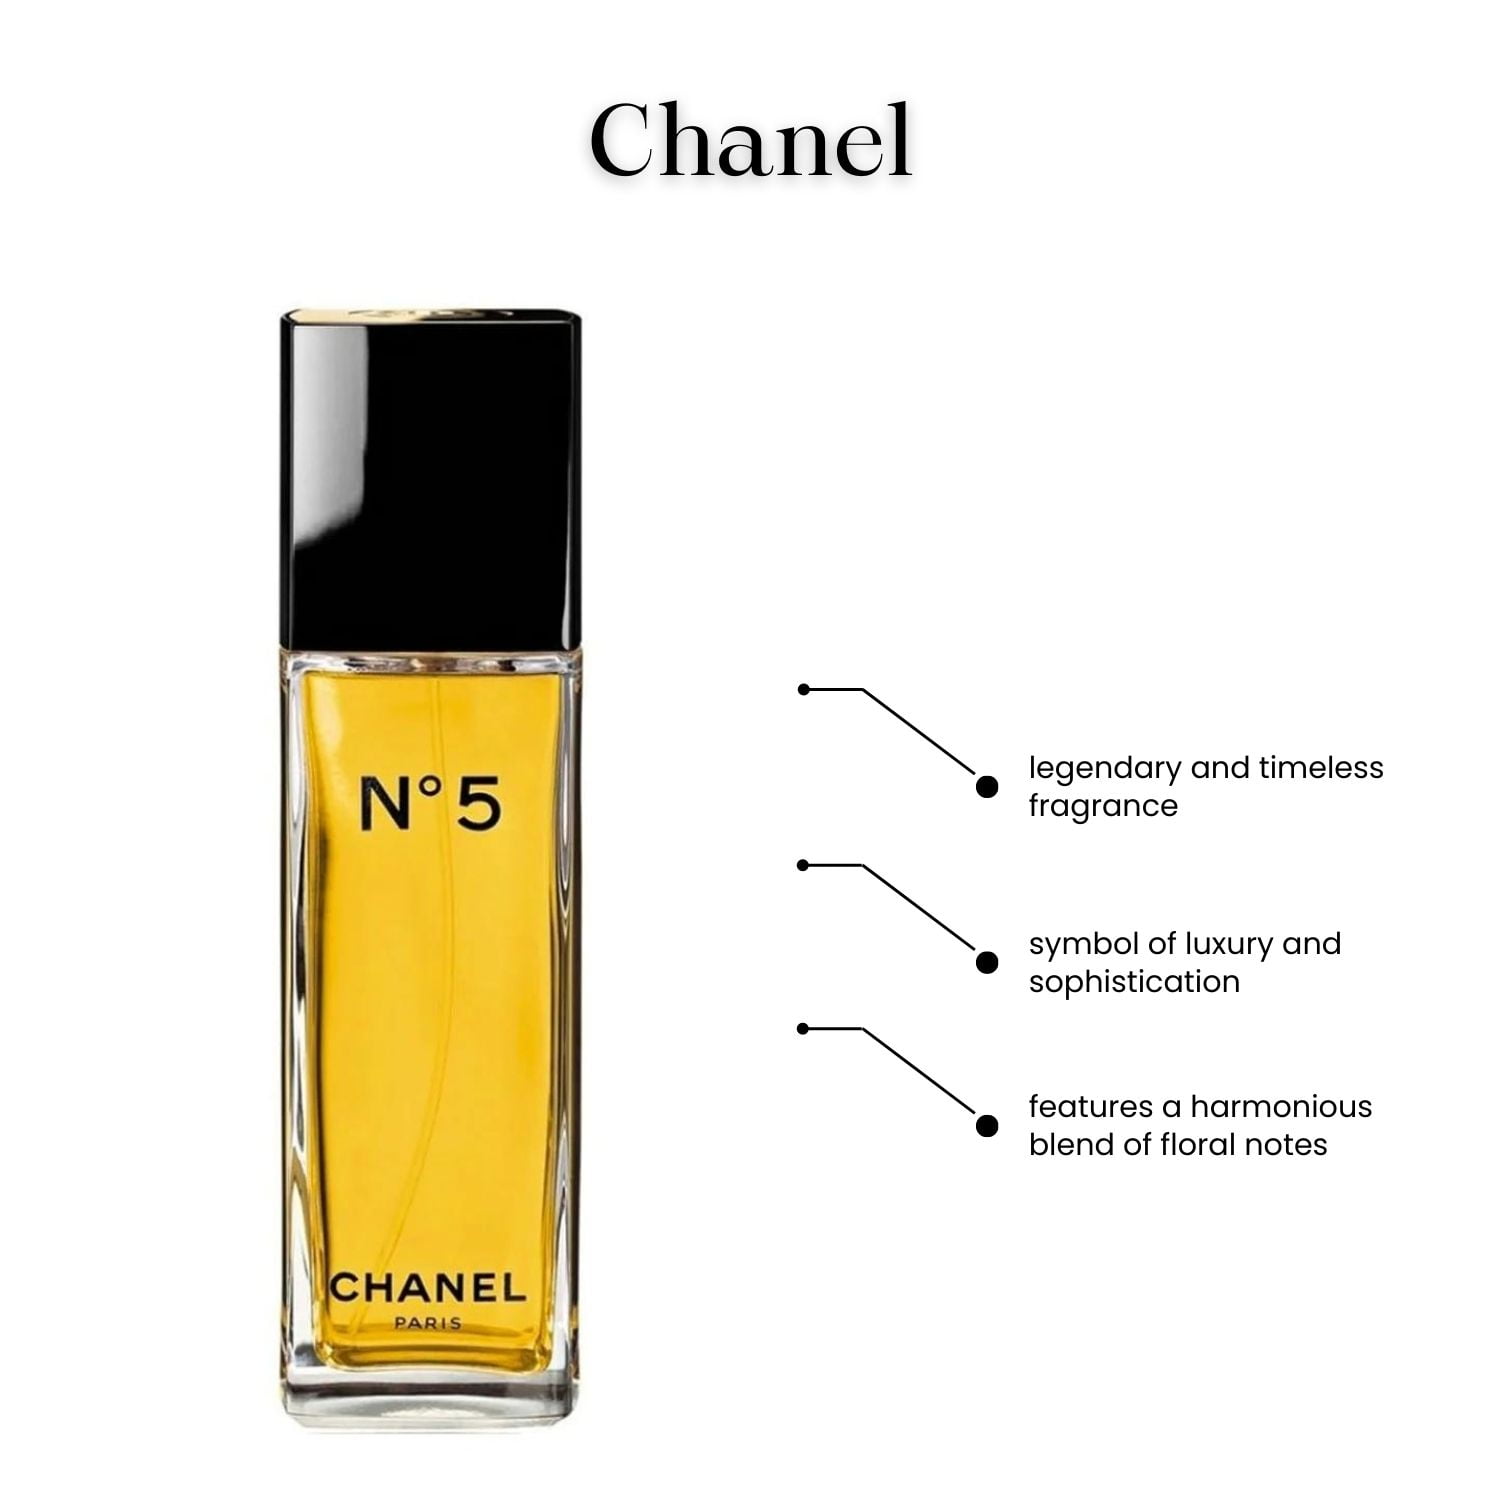 chanel no. 5 for women edt, 1.7 oz